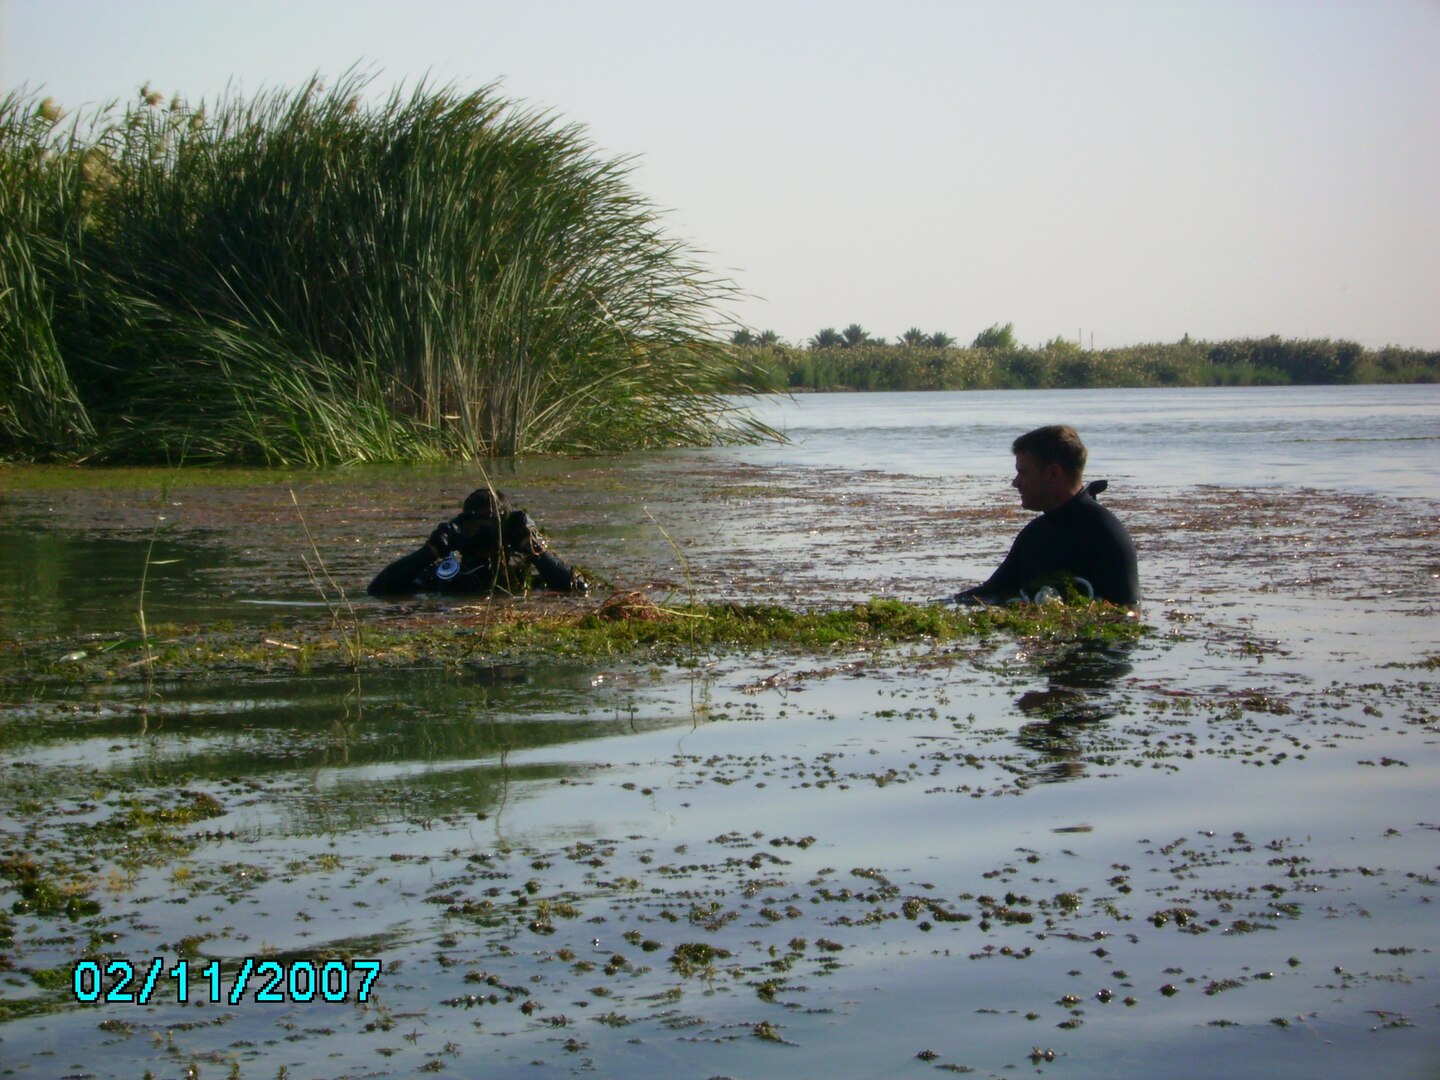 Jon Larrew conducting a search in a river in the Middle East.